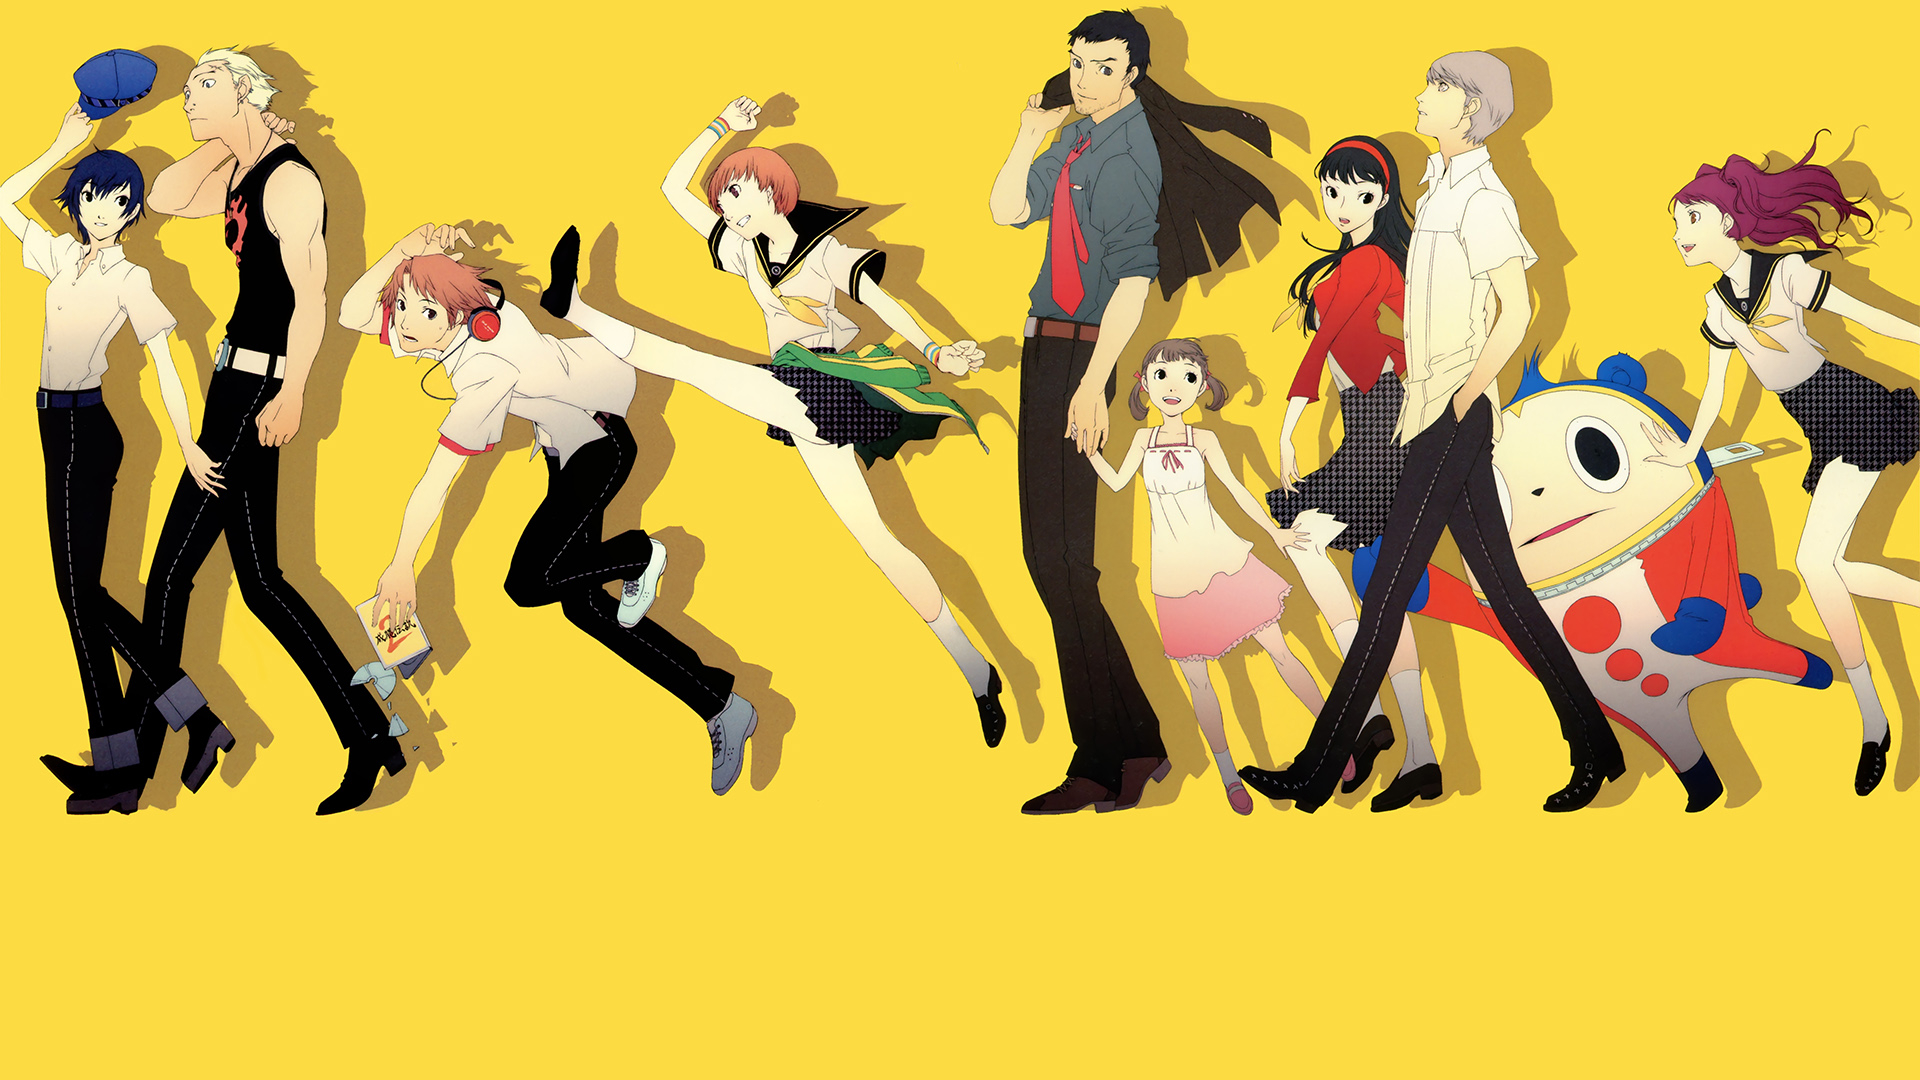 1920x1080 140+ Persona 4 HD Wallpapers and Backgrounds